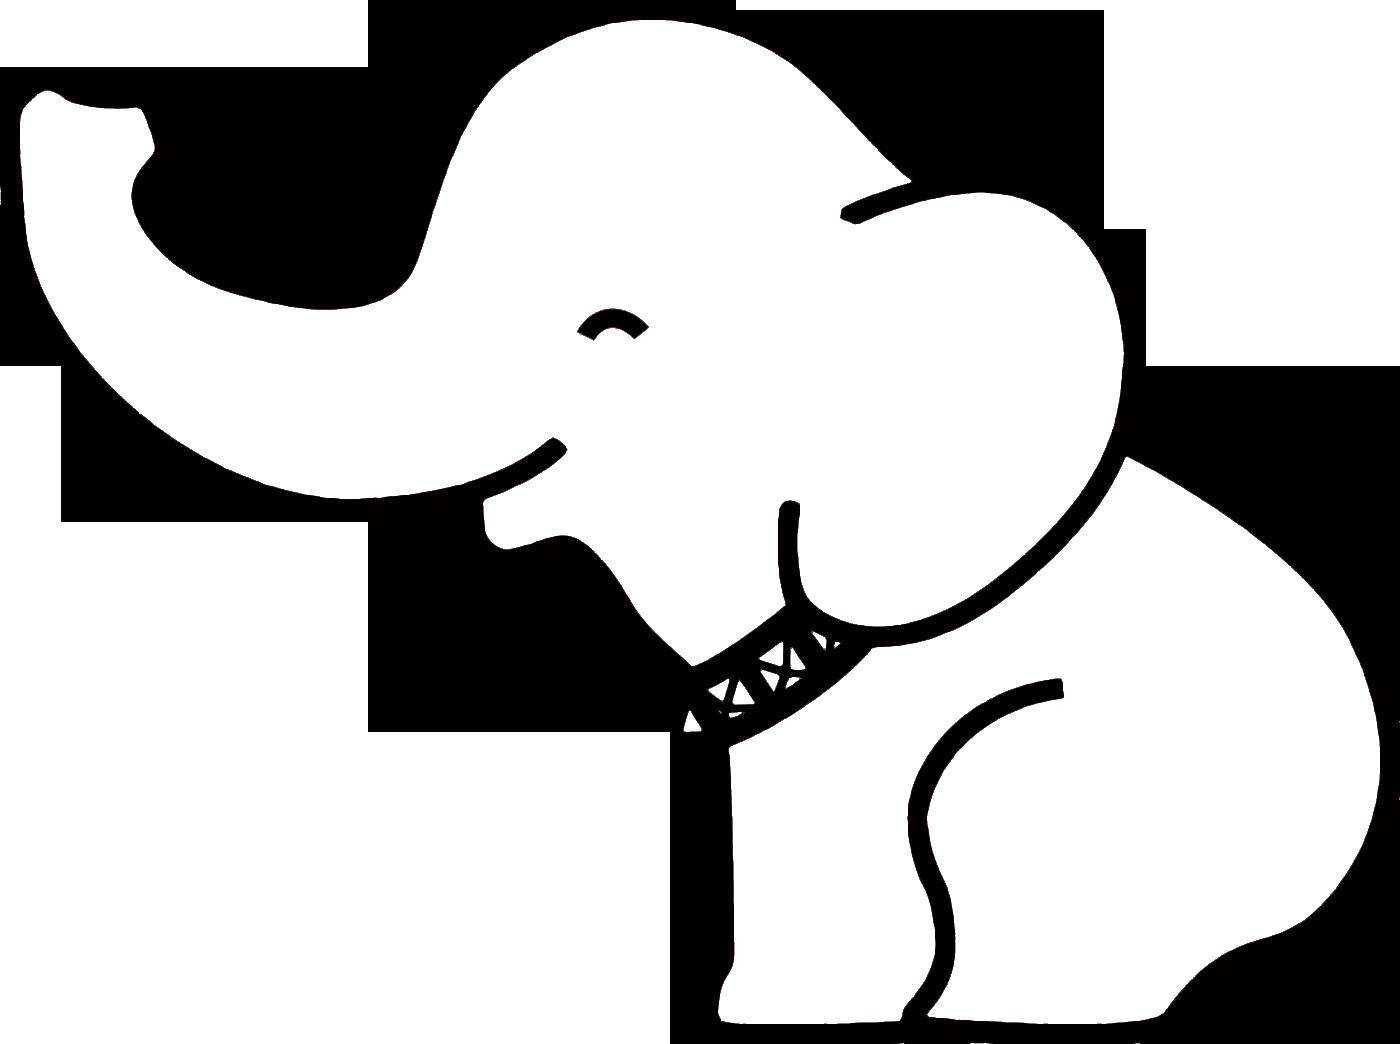 Coloring The elephant is smiling. Category the contours of the elephant to cut. Tags:  Animals, elephant.